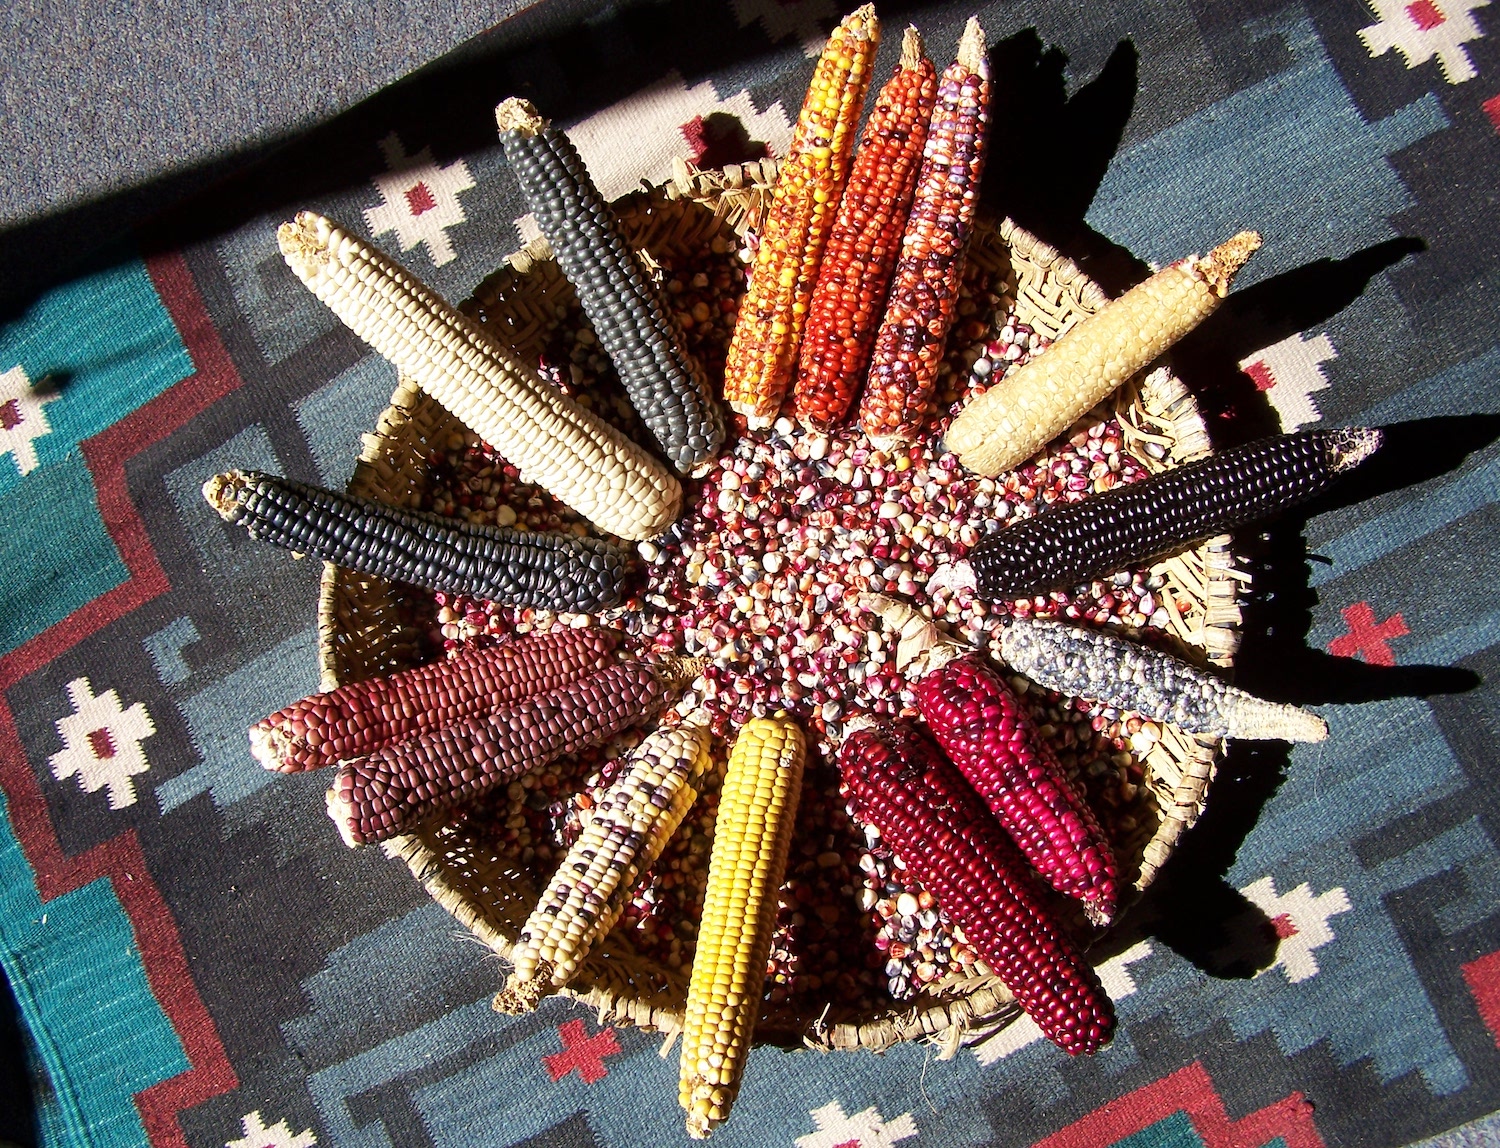 The diversity of Hopi maize. DNA analyses were done on some of these varieties as part of the Pueblo Farming Project.